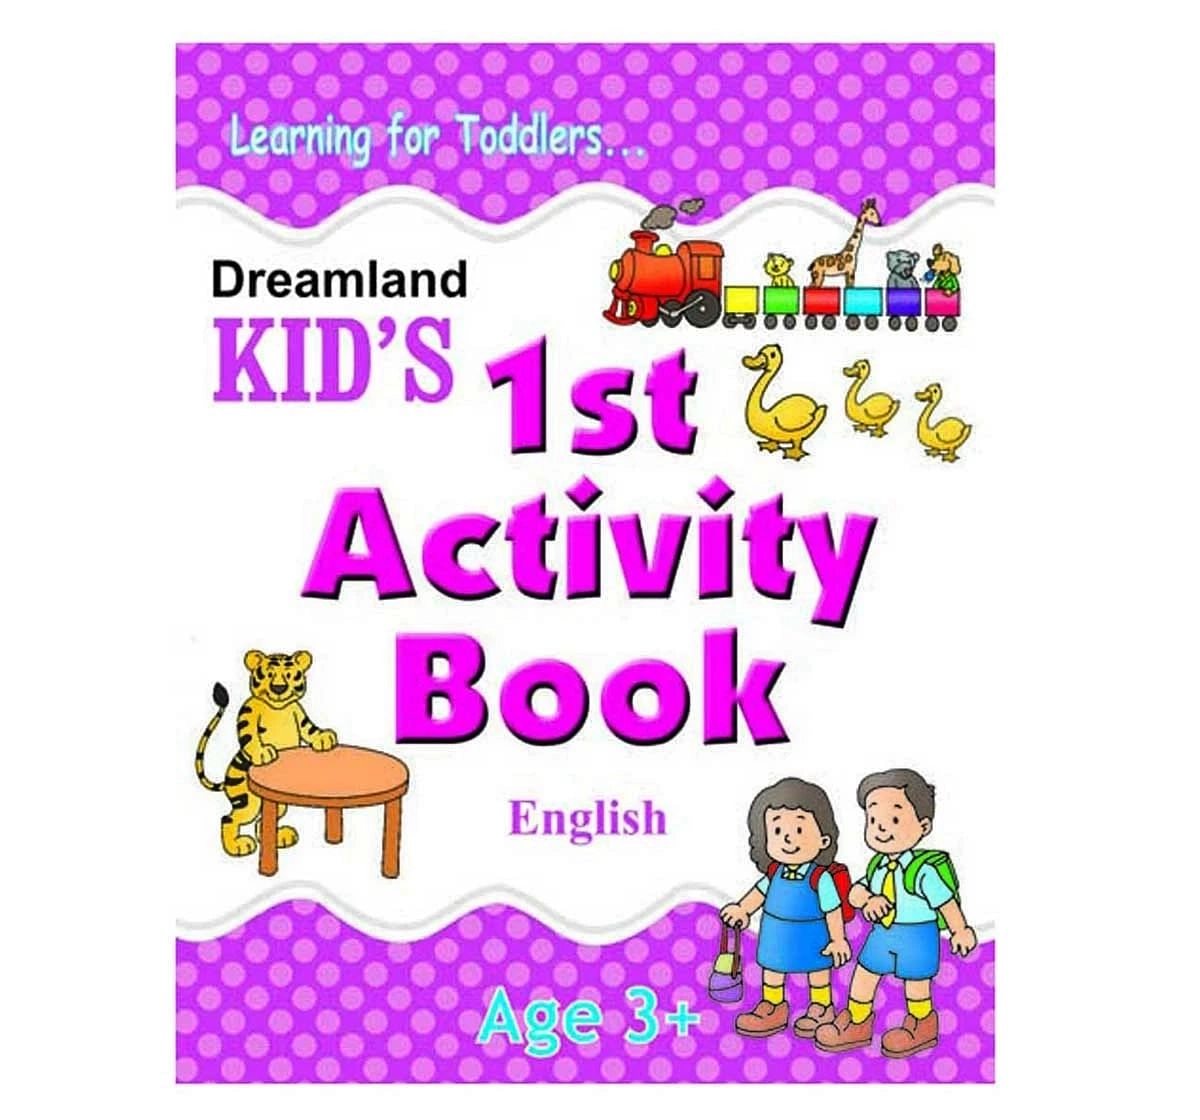 Dreamland Paper Back 1st English Activity Book for kids 3Y+, Multicolour